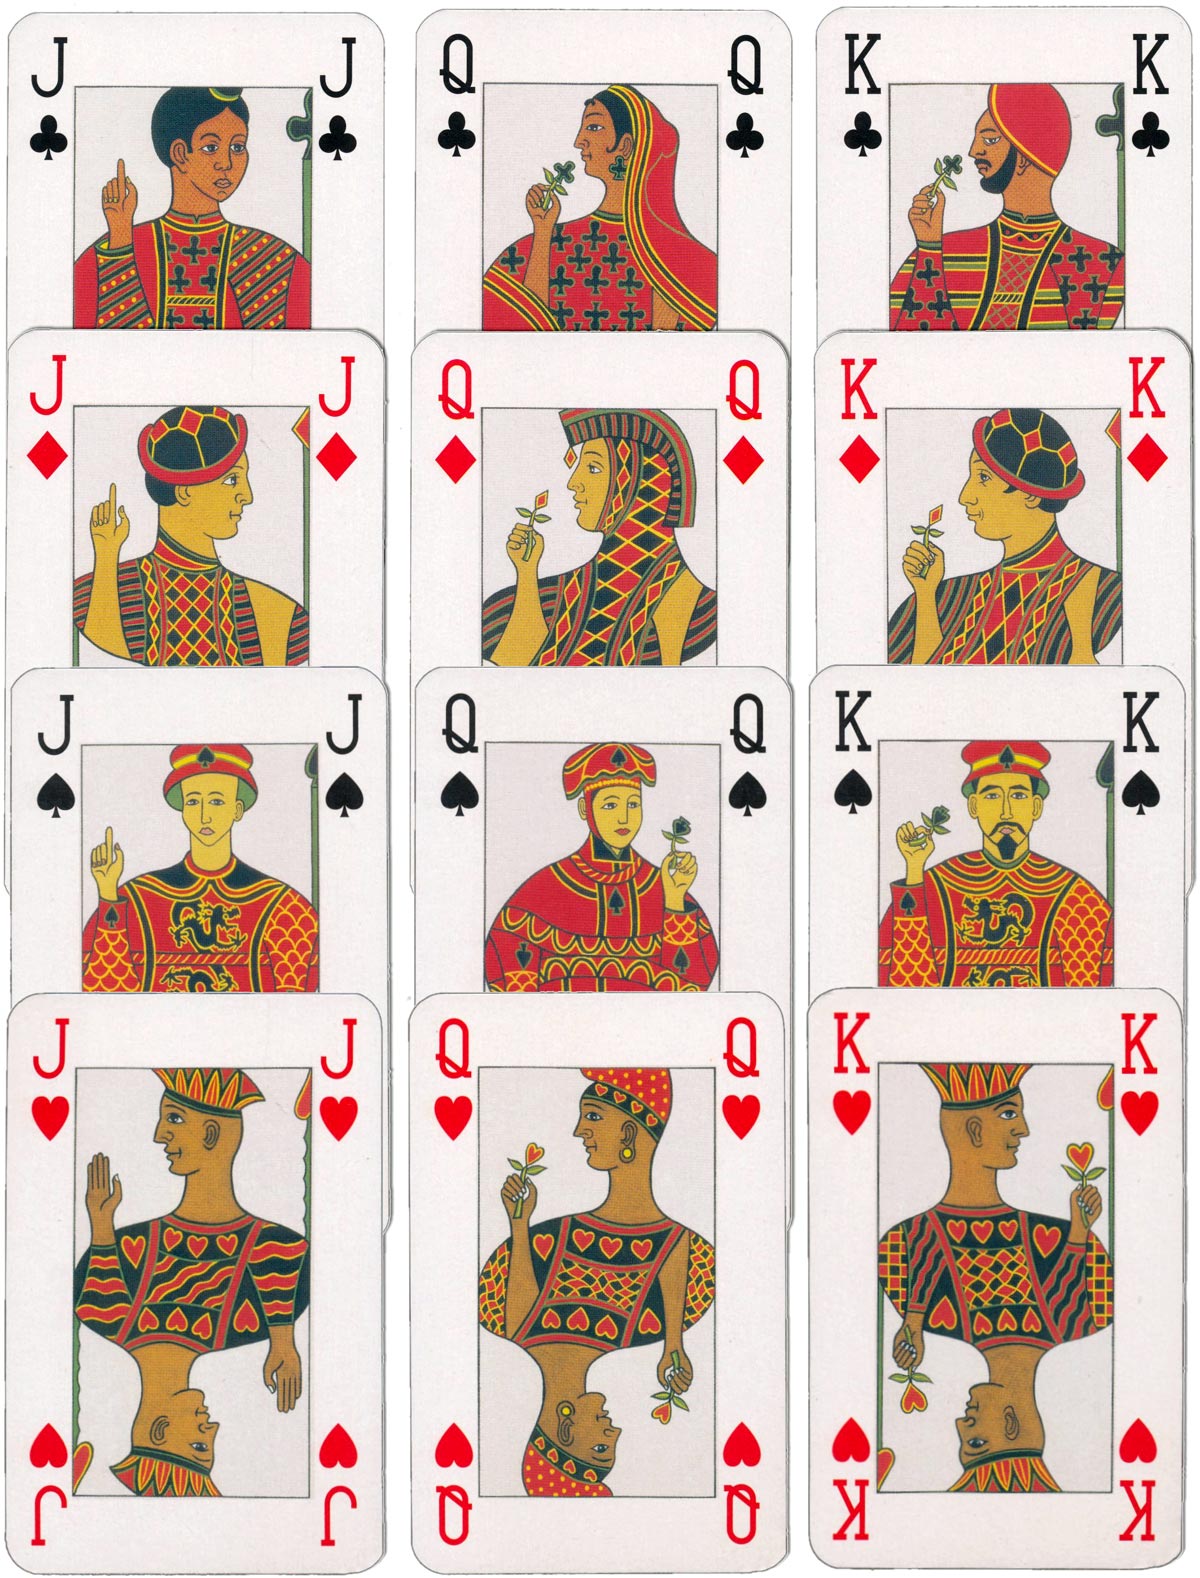 Fair Play cross cultural playing cards The World of Playing Cards